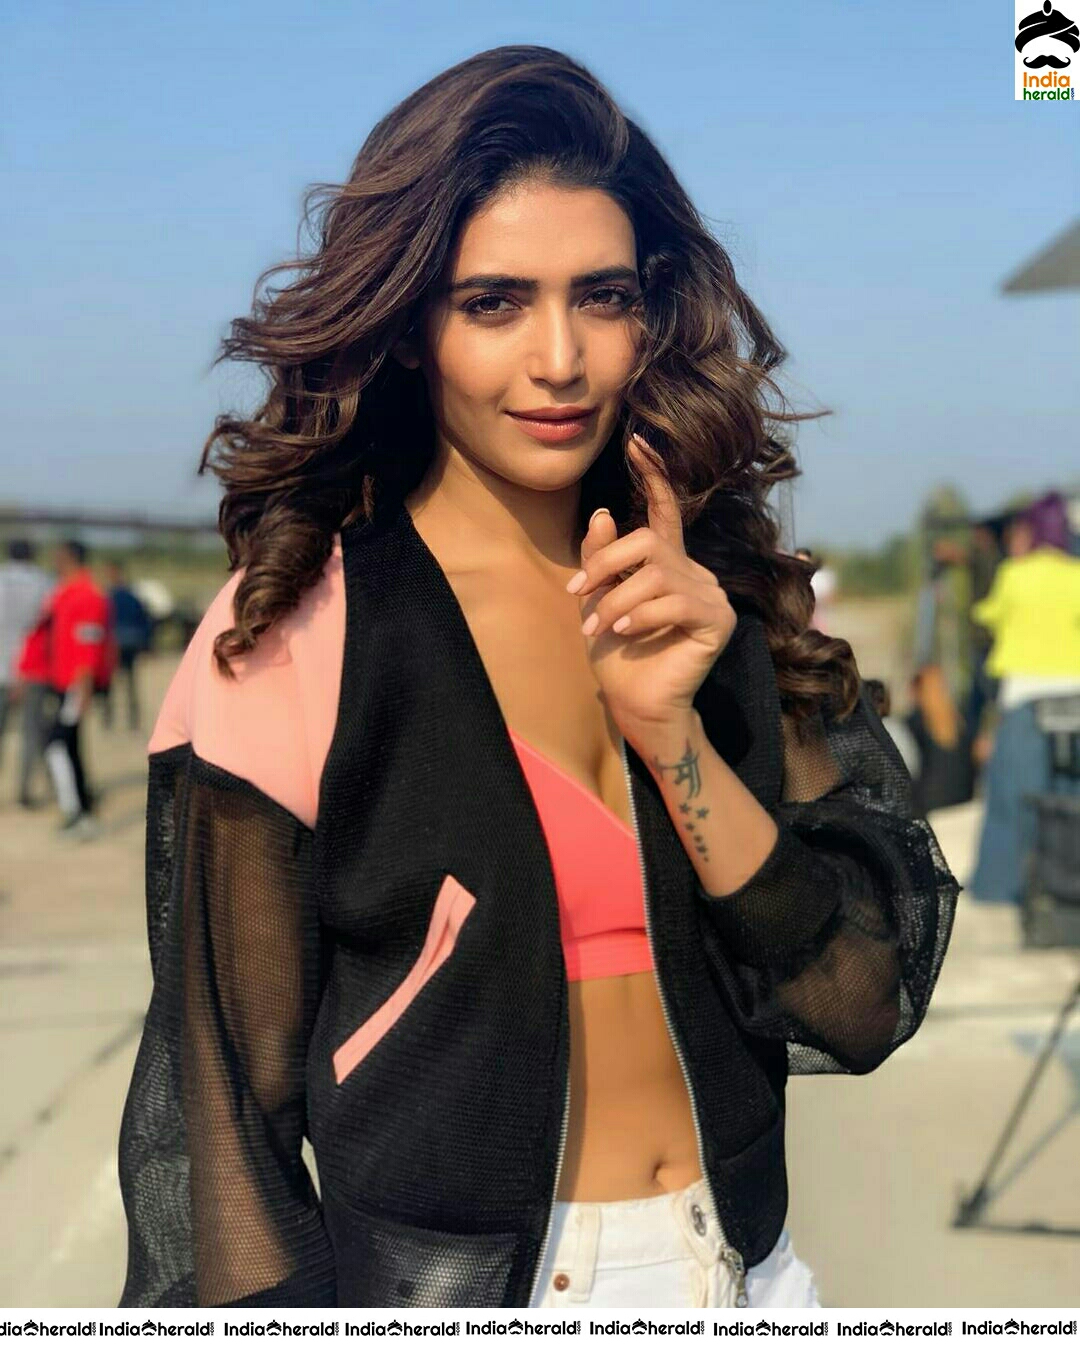 Karishma Tanna Hot In Transparent Top In These Photoshoot